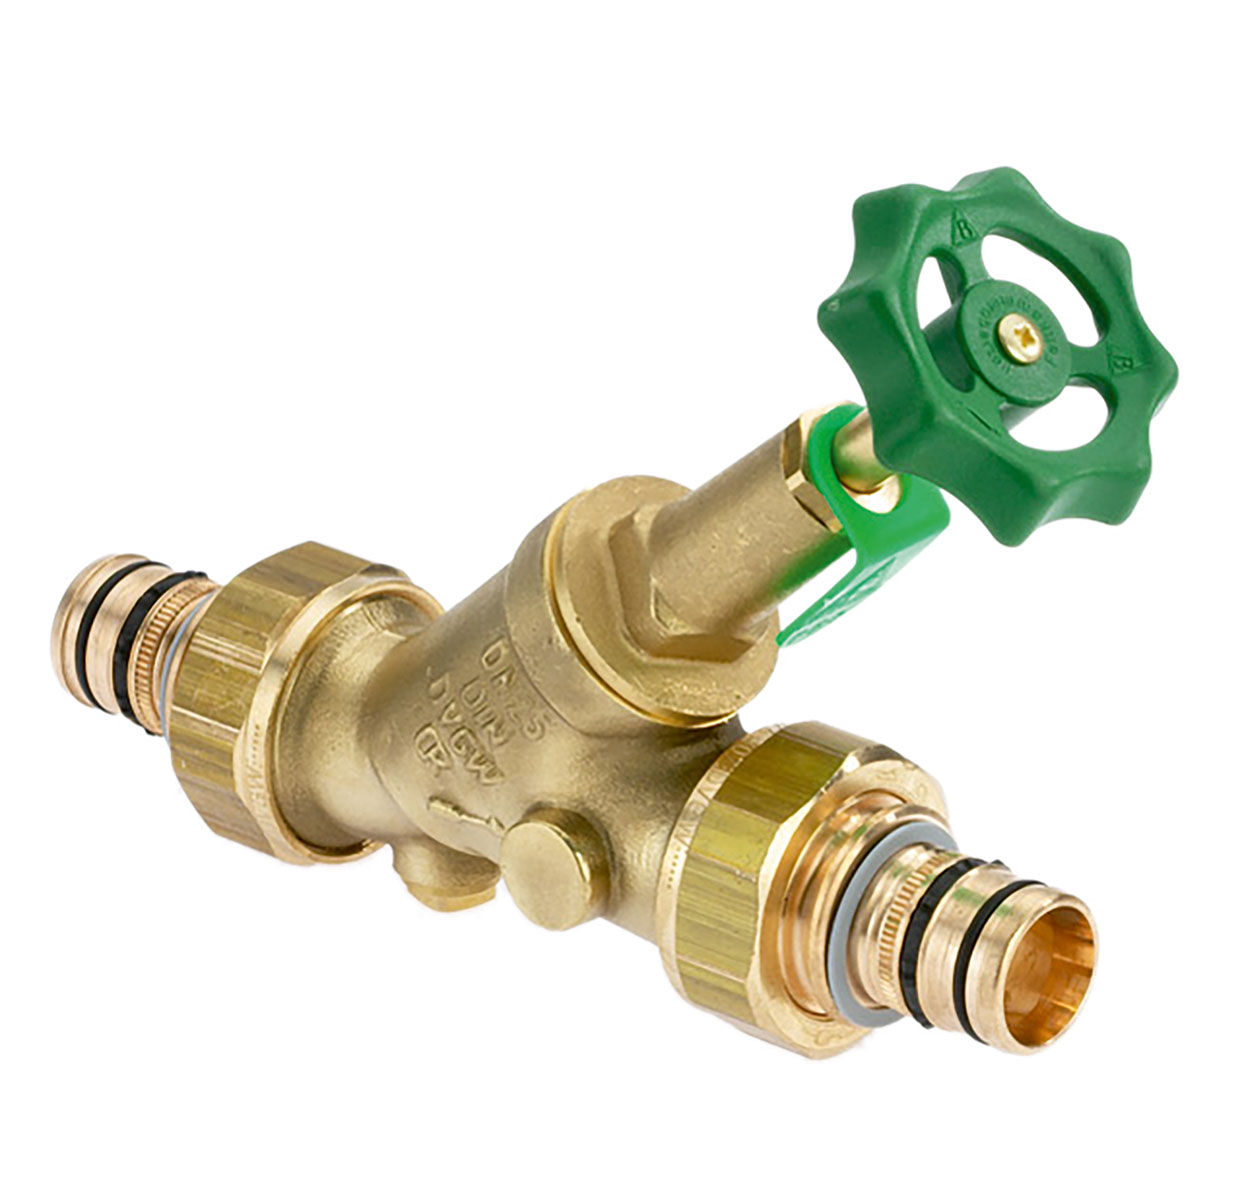 1636420 - CR-Brass Combined Free-flow and Backflow-preventer Valve Geberit Mepla, rising, without drain valve